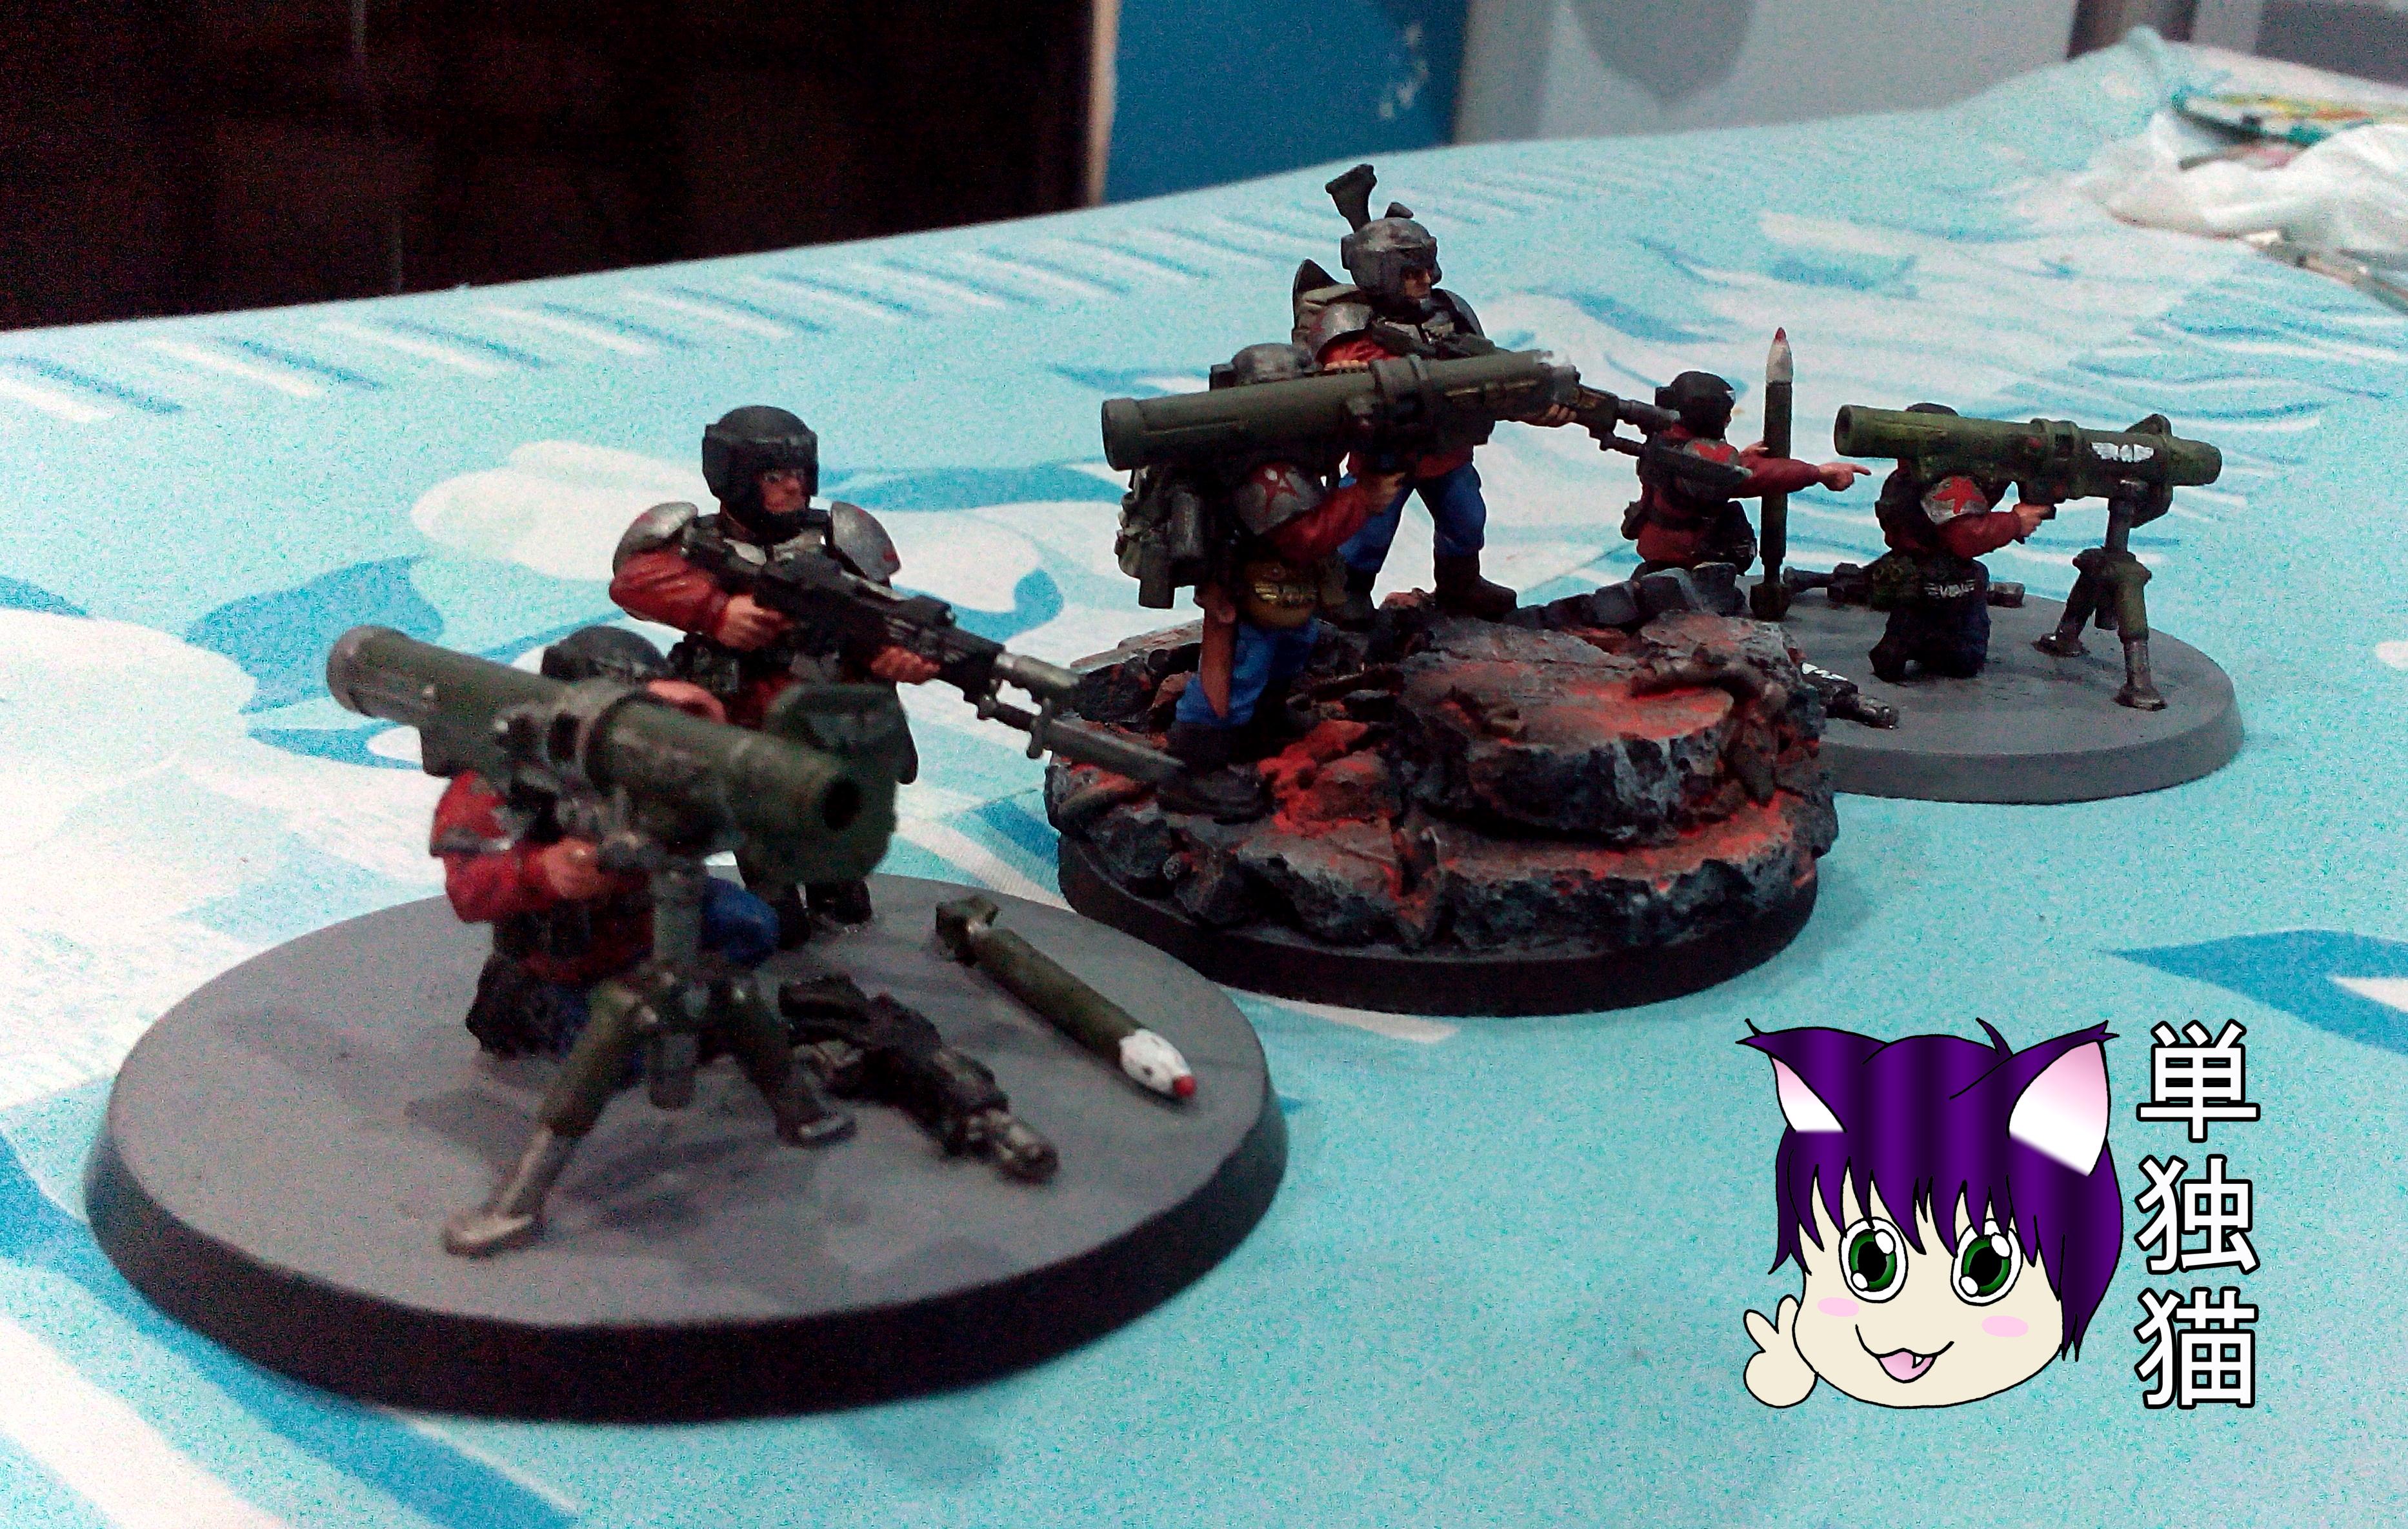 Bazooka, Heavyweapons, Imperial Guard, Missile Launcher